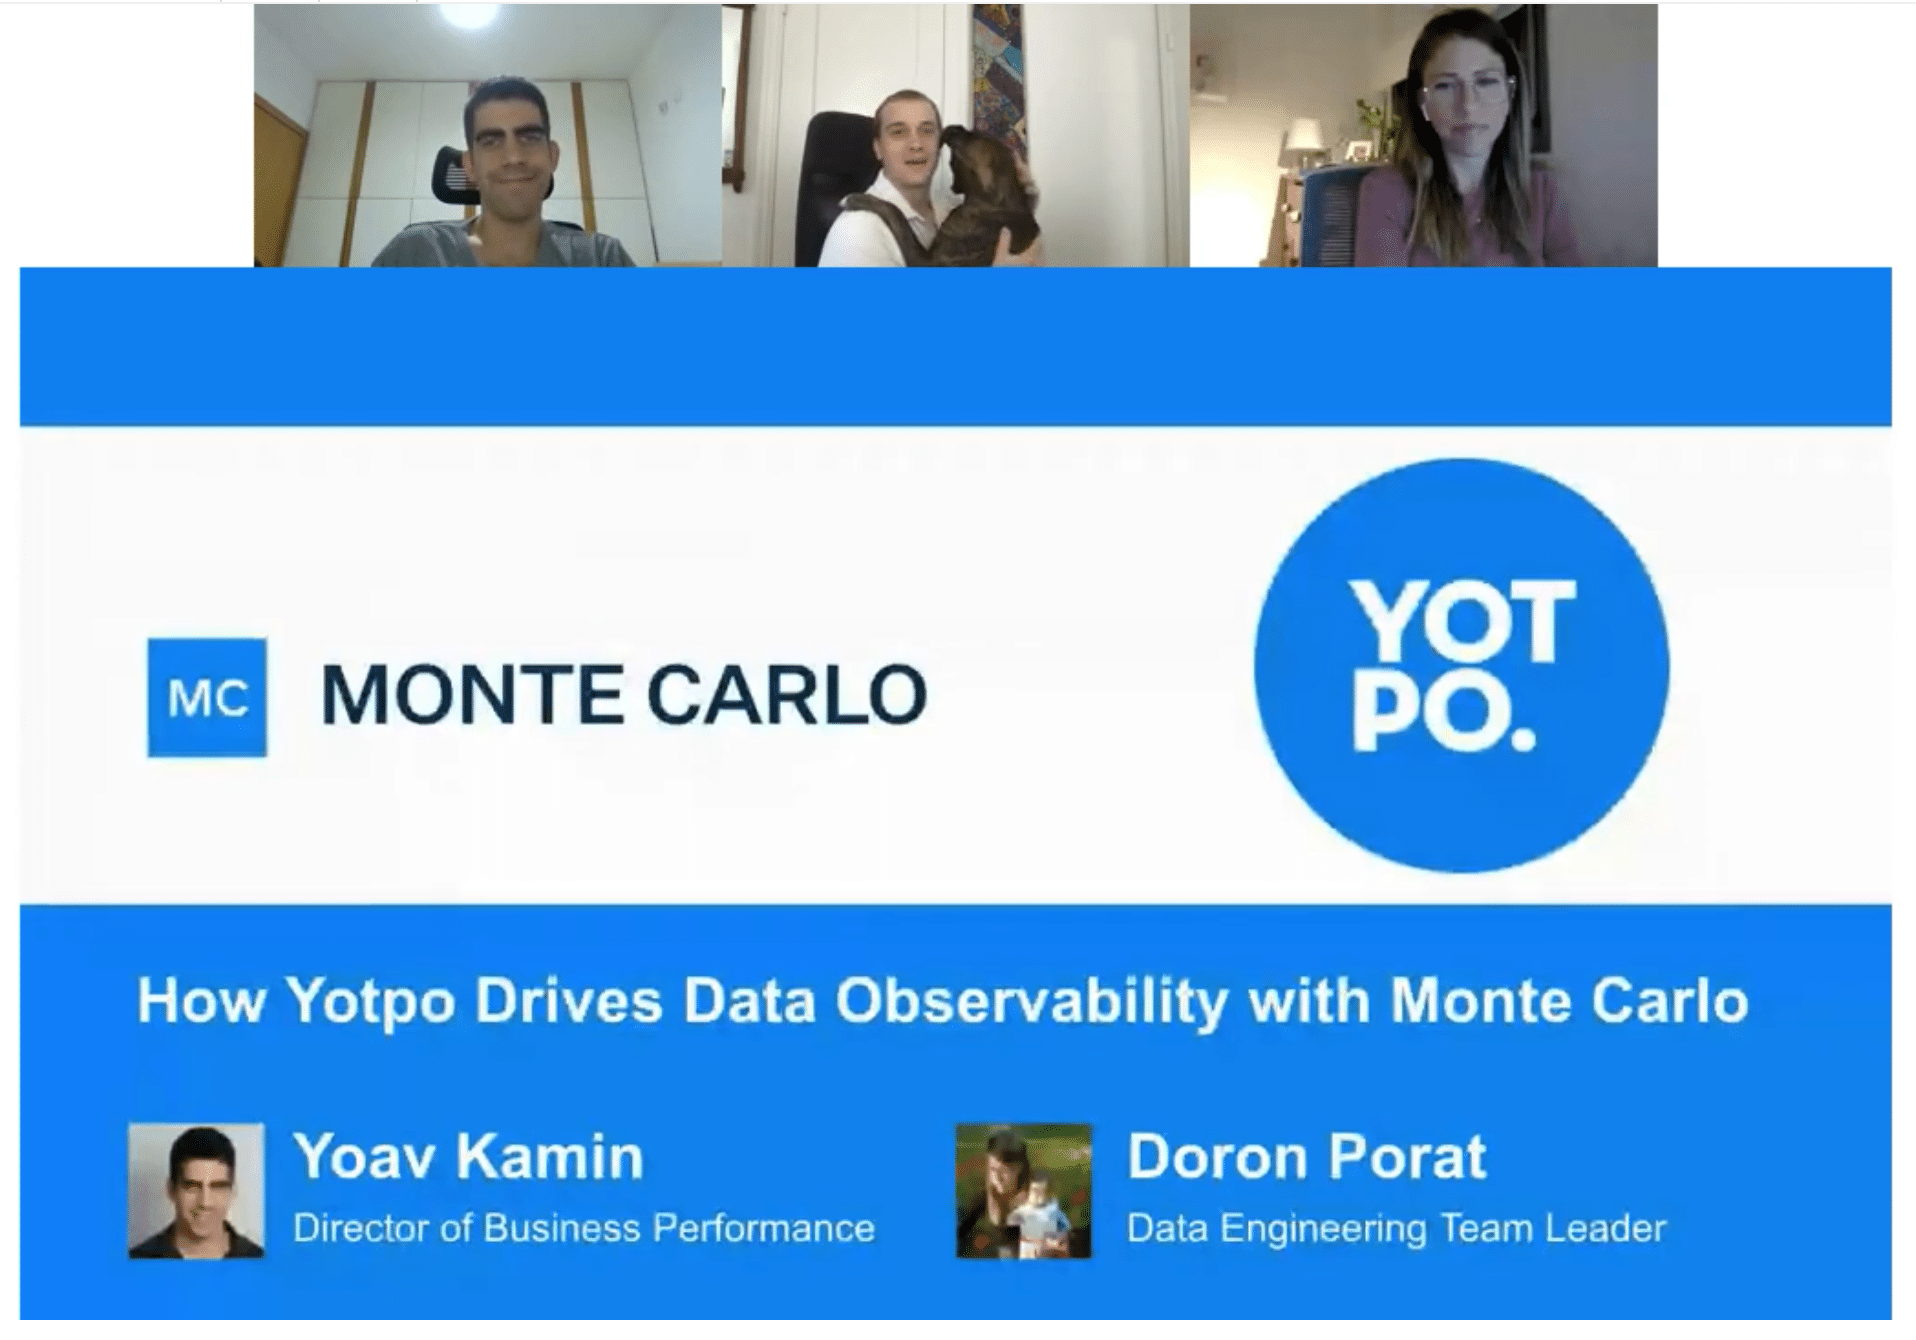 [VIDEO] How Yotpo Drives Data Observability with Monte Carlo